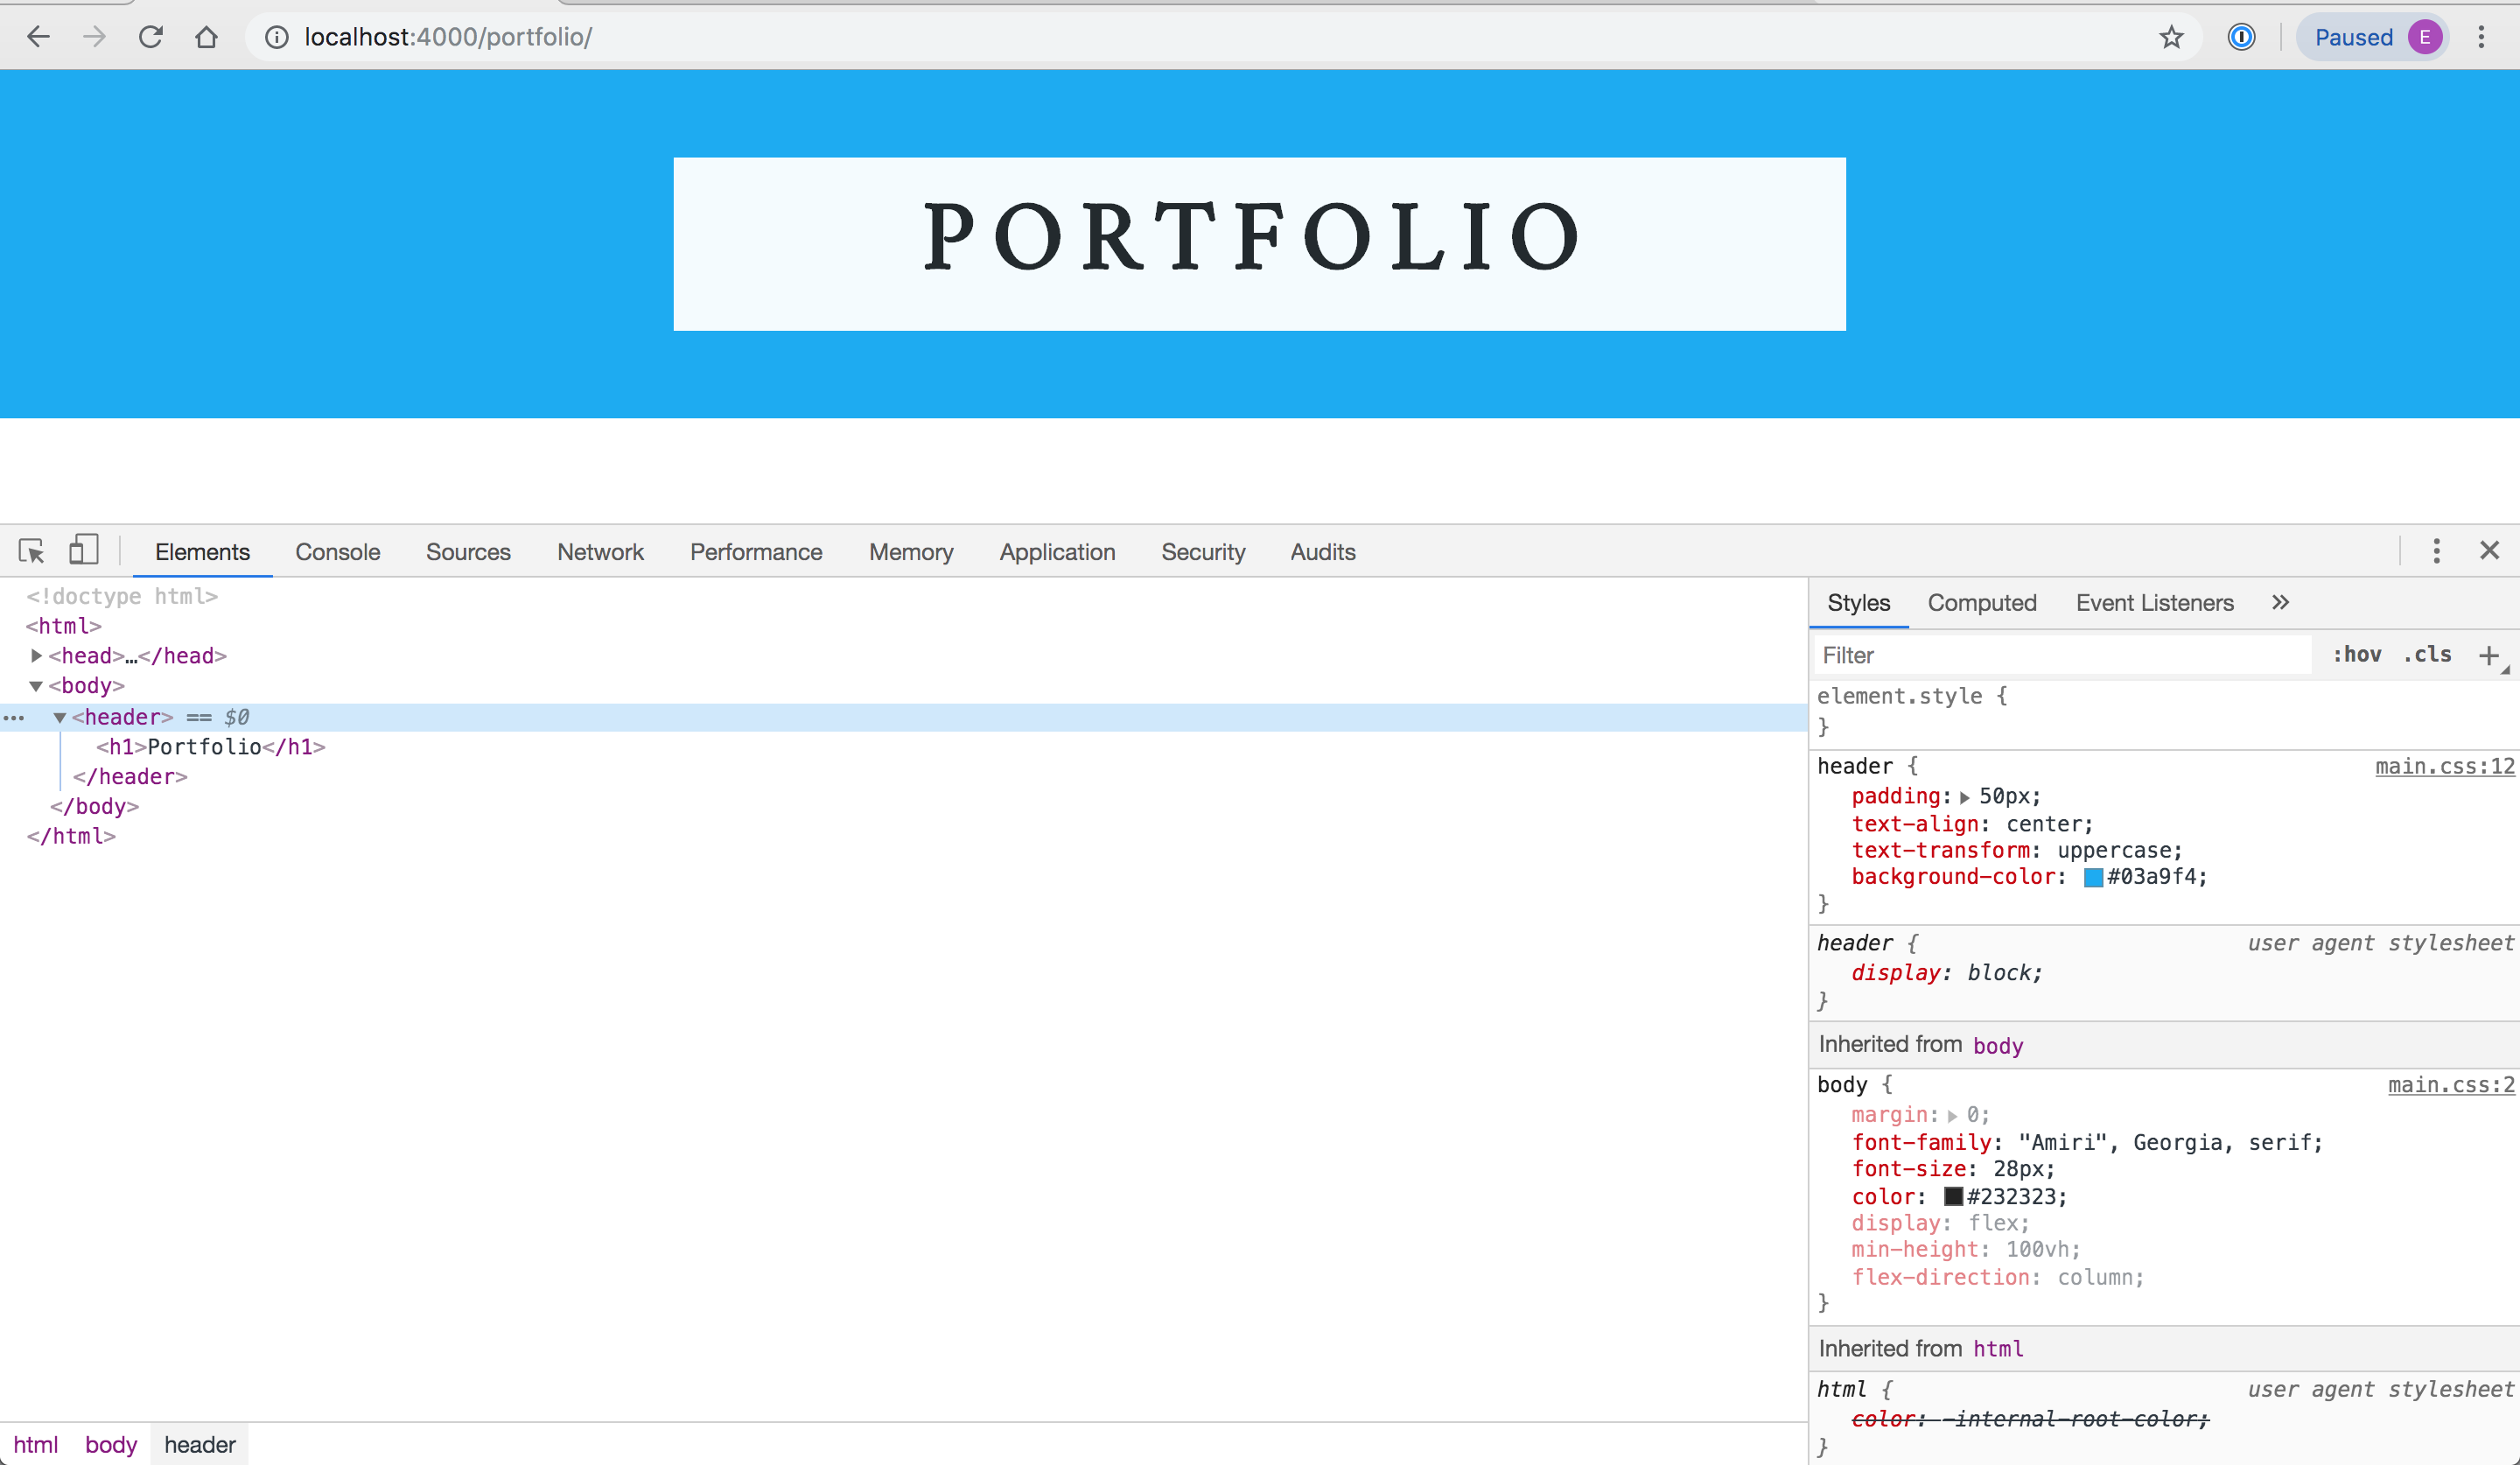 Screeshot of the portfolio page showing the header is blue